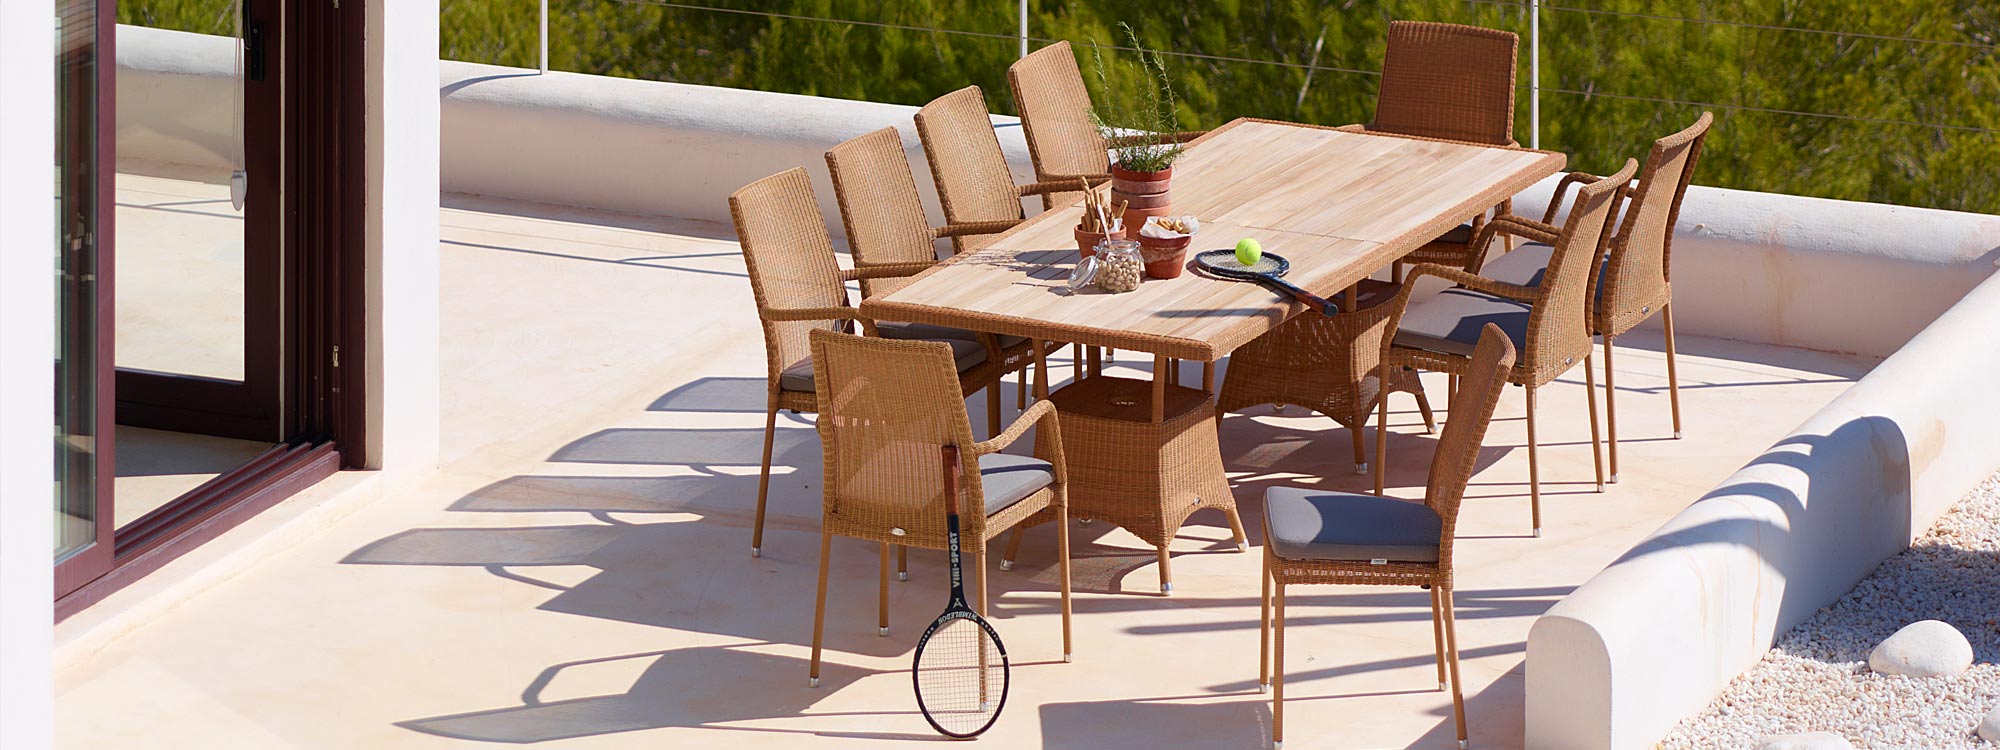 Newman rattan garden chair is a woven outdoor chair in high quality outdoor furniture materials by Caneline whicker garden furniture co.